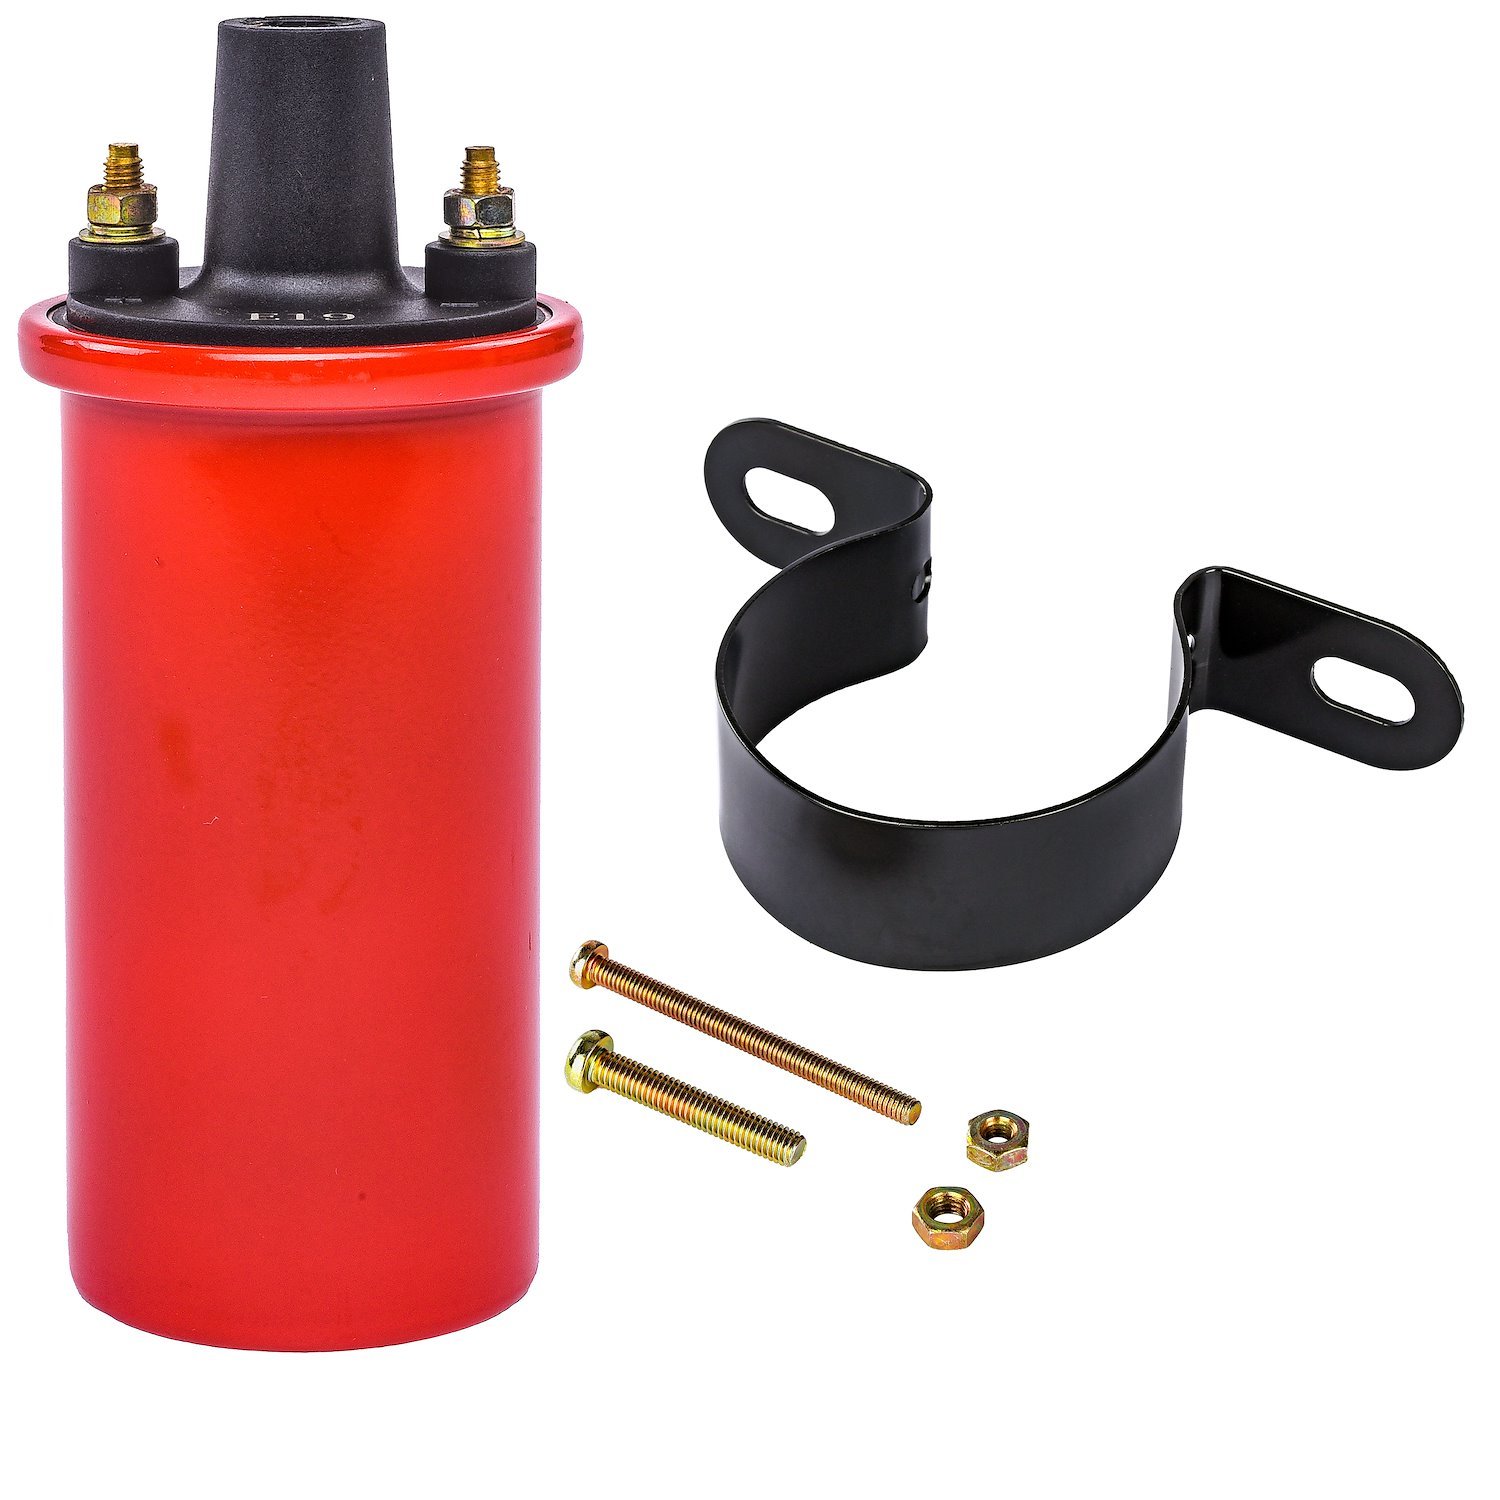 High-Energy Ignition Coil and Bracket Kit [Red Coil and Black Panel Mount Bracket]